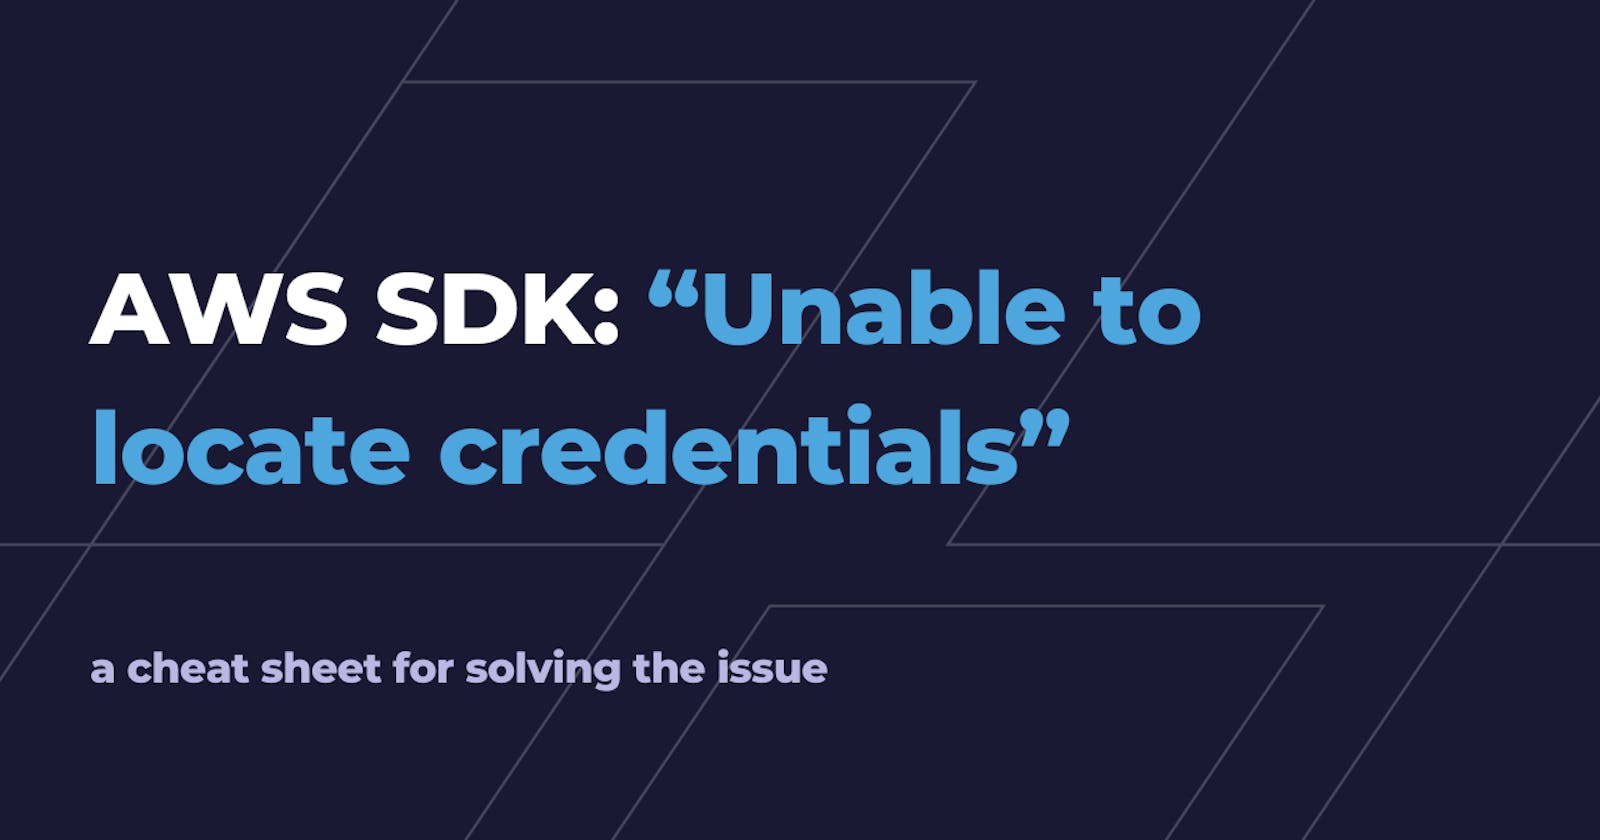 AWS SDK: "Unable to locate credentials"